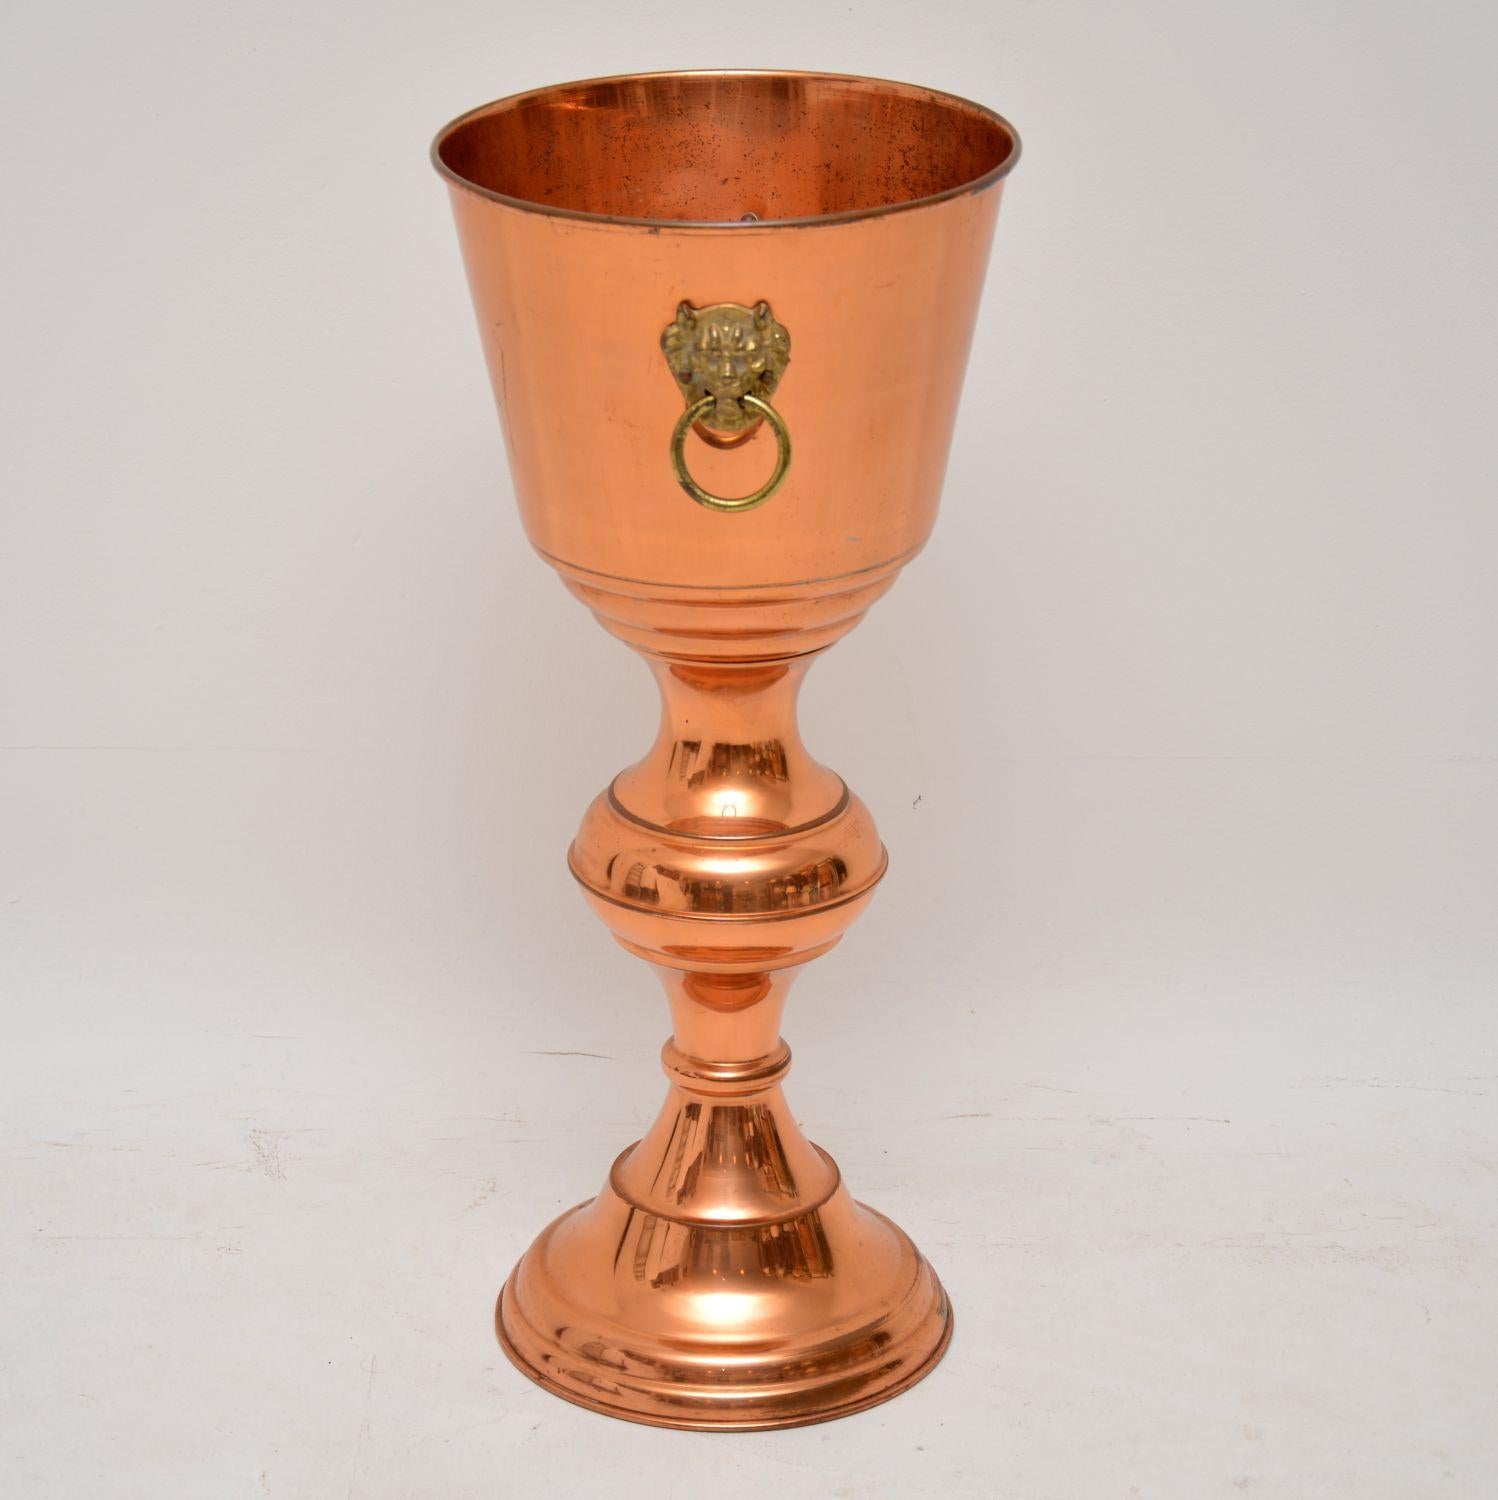 A stunning vintage copper champagne bucket or planter, this would work perfectly as either. It dates from the 1960s-1970s, and was made in Portugal. This is in lovely original vintage condition, with some minor wear and tarnishing here and